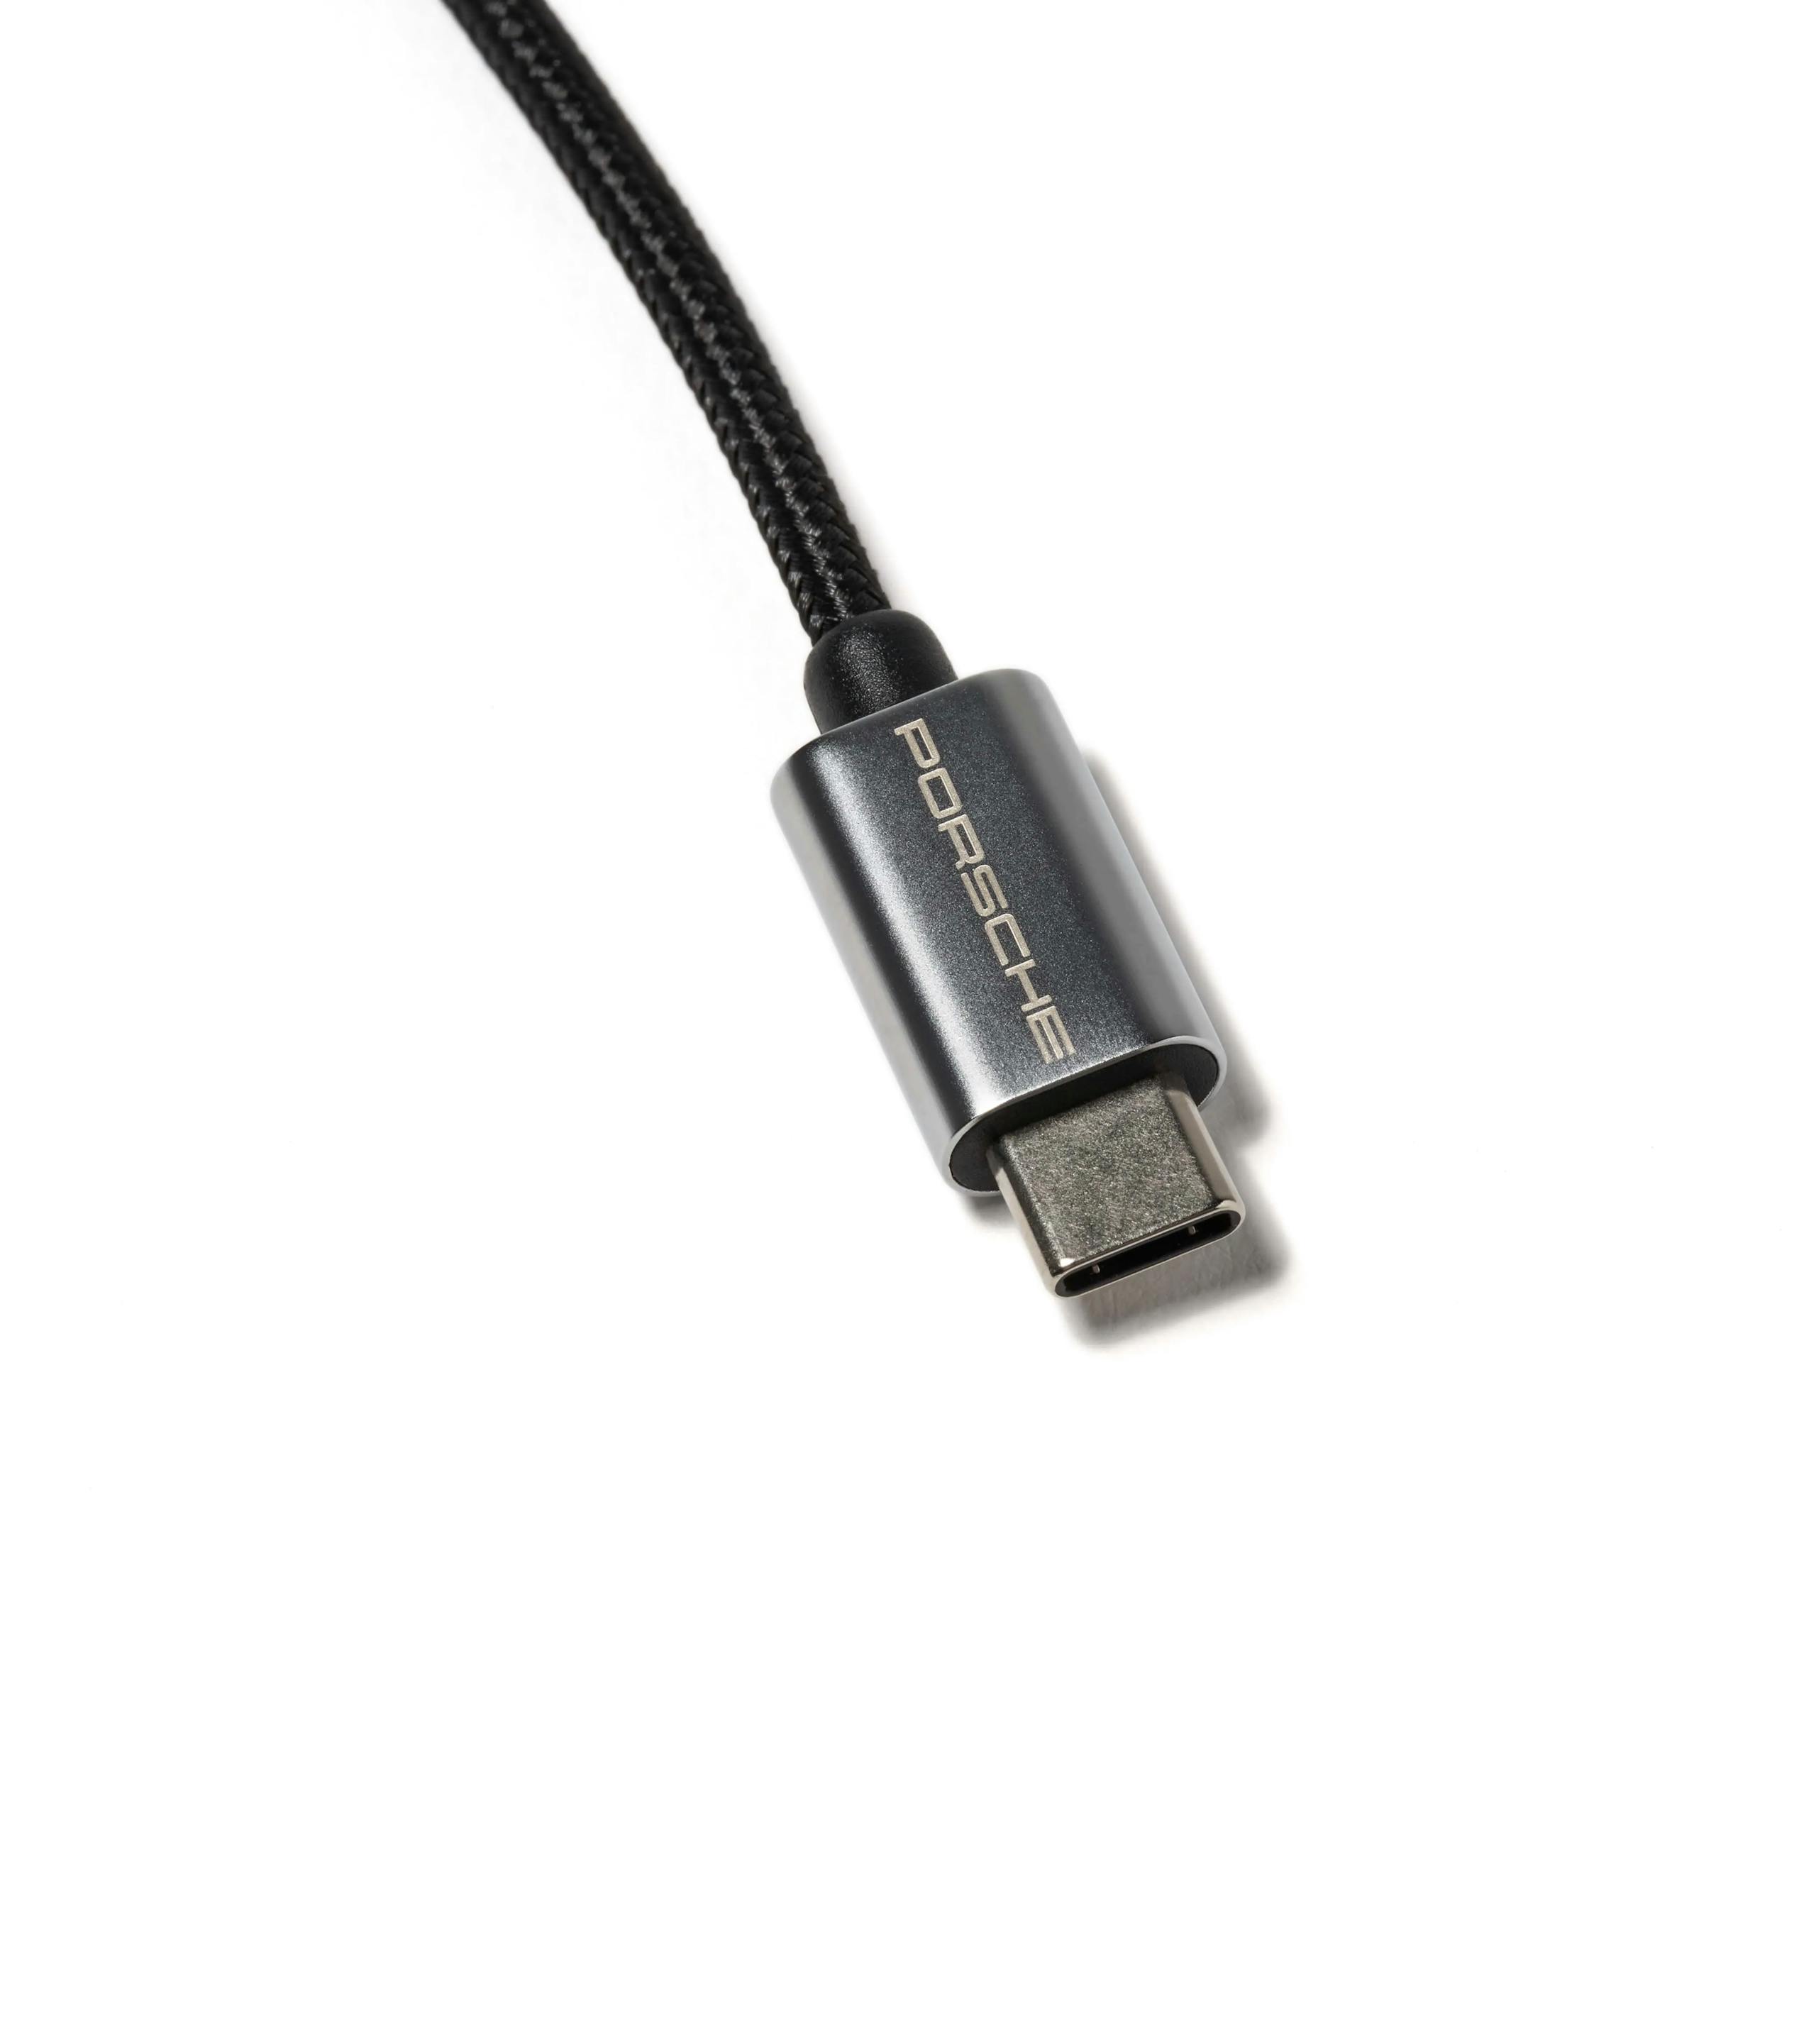 USB type C™ smartphone charging cable with Apple Lightning® connection 3